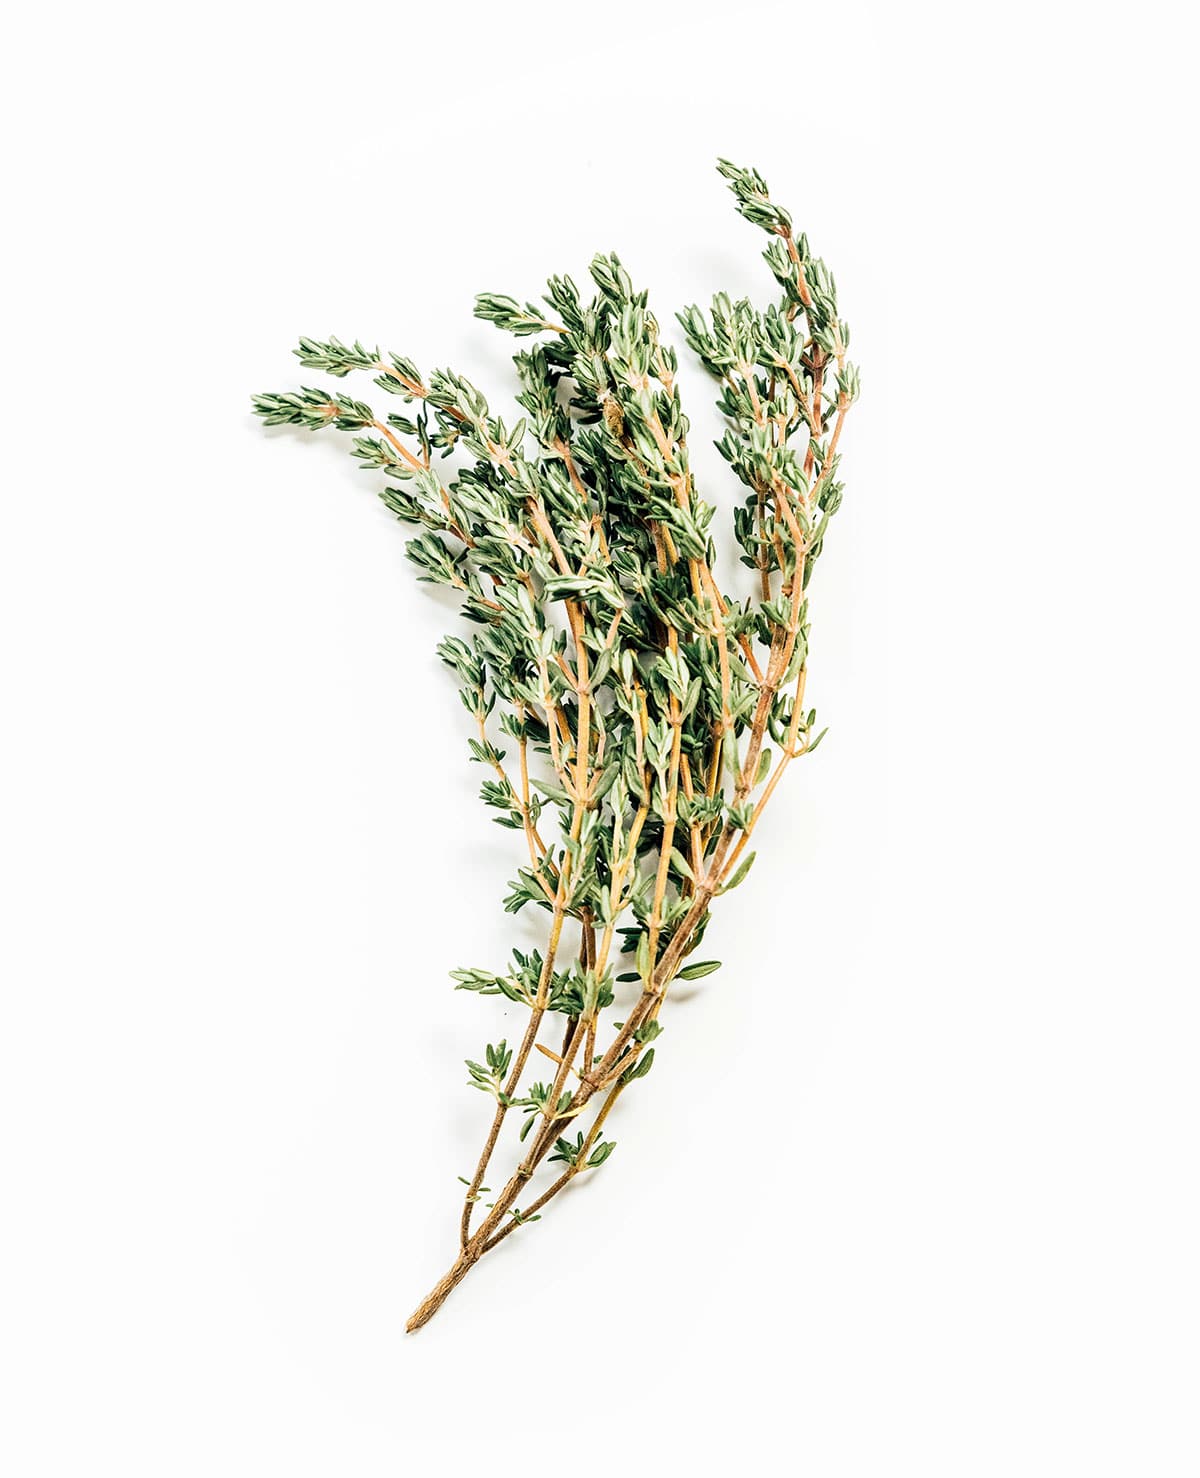 Thyme sprig on a white background.